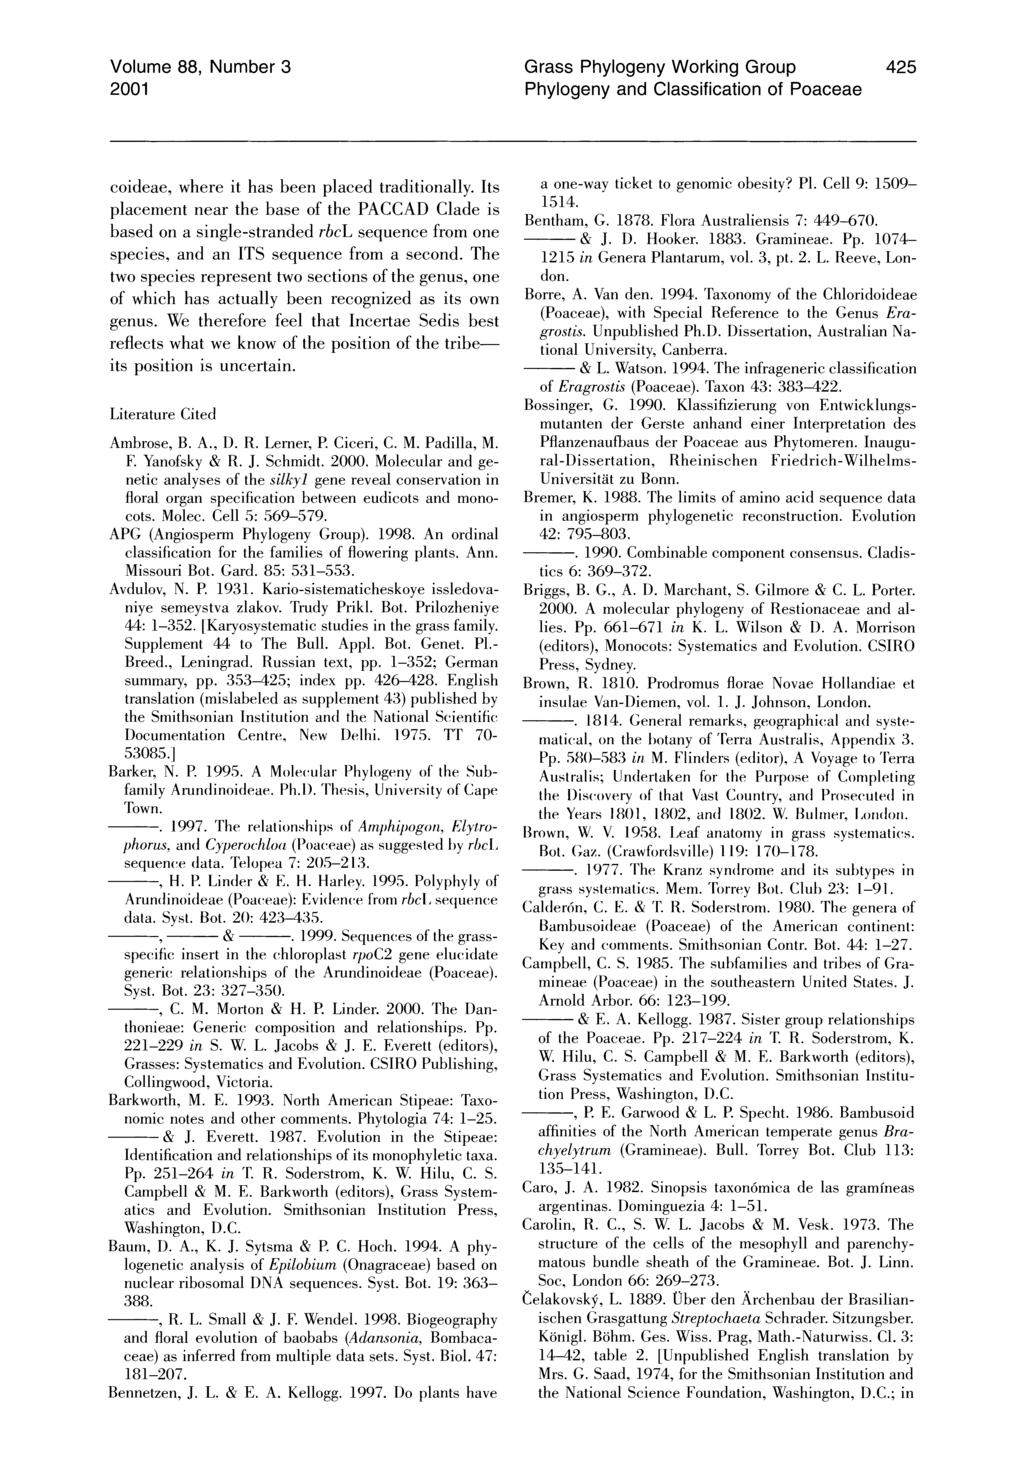 Volume 88, Number 3 2001 Grass Phylogeny Working Group Phylogeny and Classification of Poaceae 425 coideae, where it has been placed traditionally.